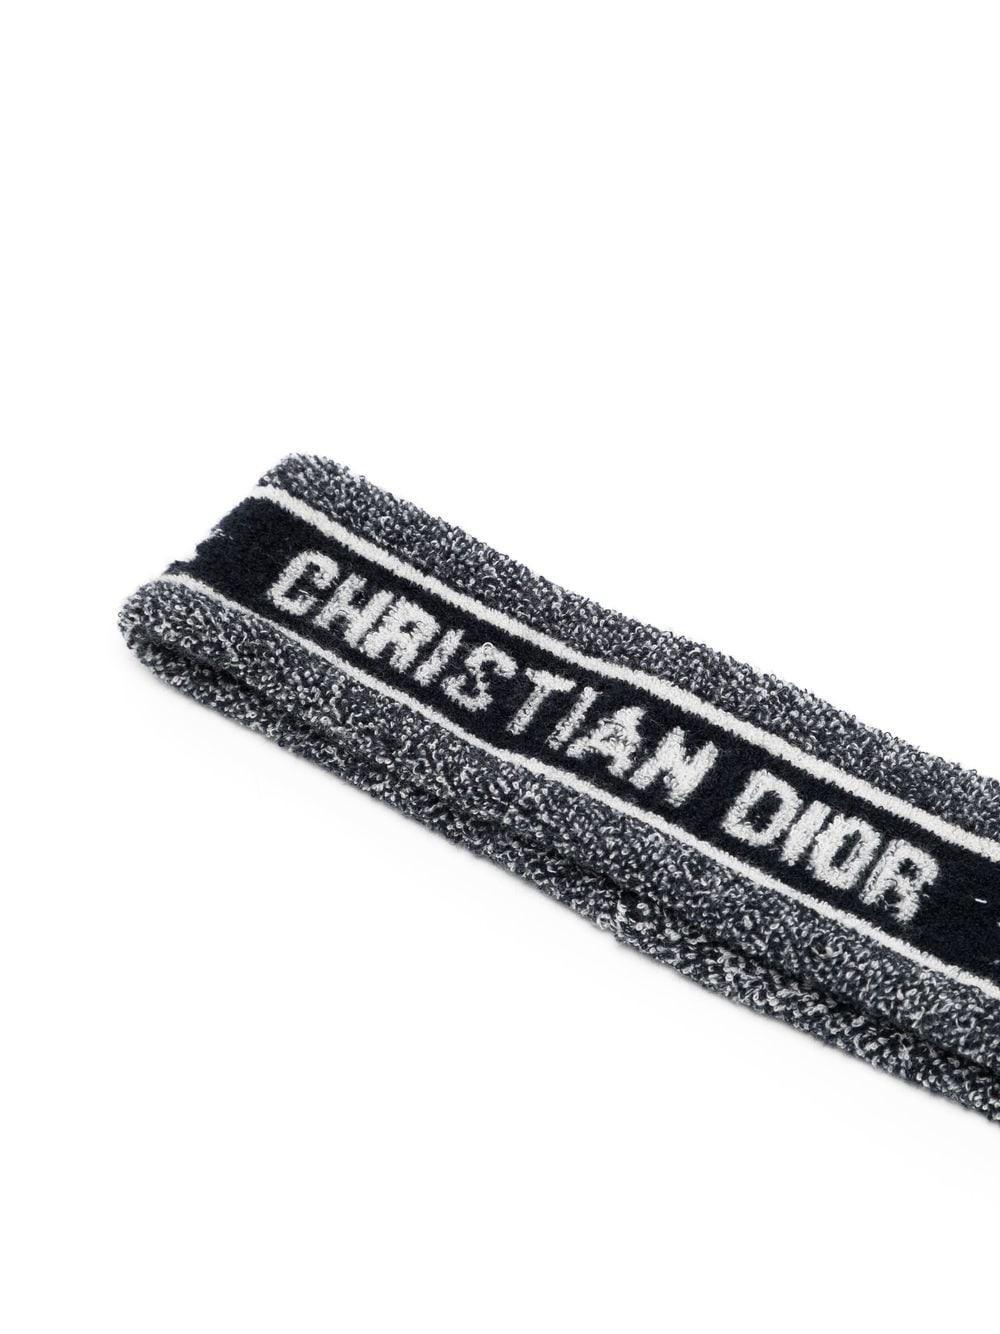 Perfect for a chic Tennis look, this terry Dior sweatband is both practical and a collector's item. This piece features terry cloth all over with the Christian Dior logo at the front.

Colour: Blue & White

Size: Onesize

Composition: Cotton 80%,